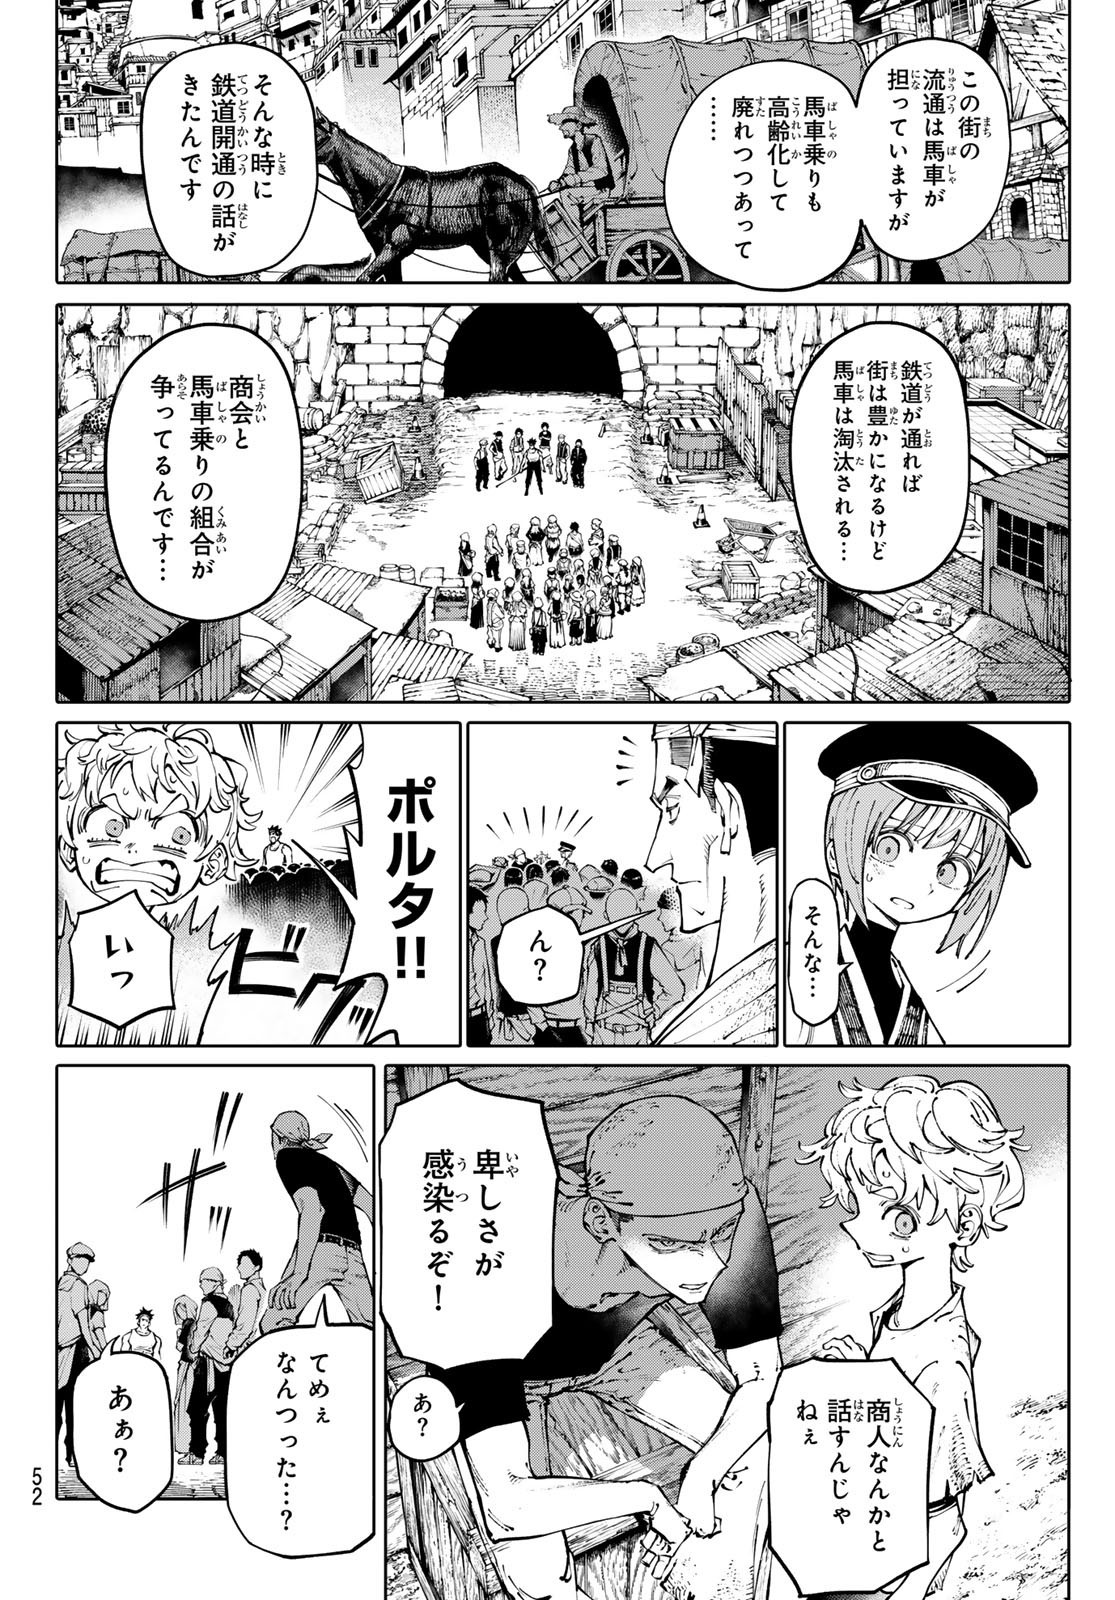 Weekly Shōnen Magazine - 週刊少年マガジン - Chapter 2024-34 - Page 49